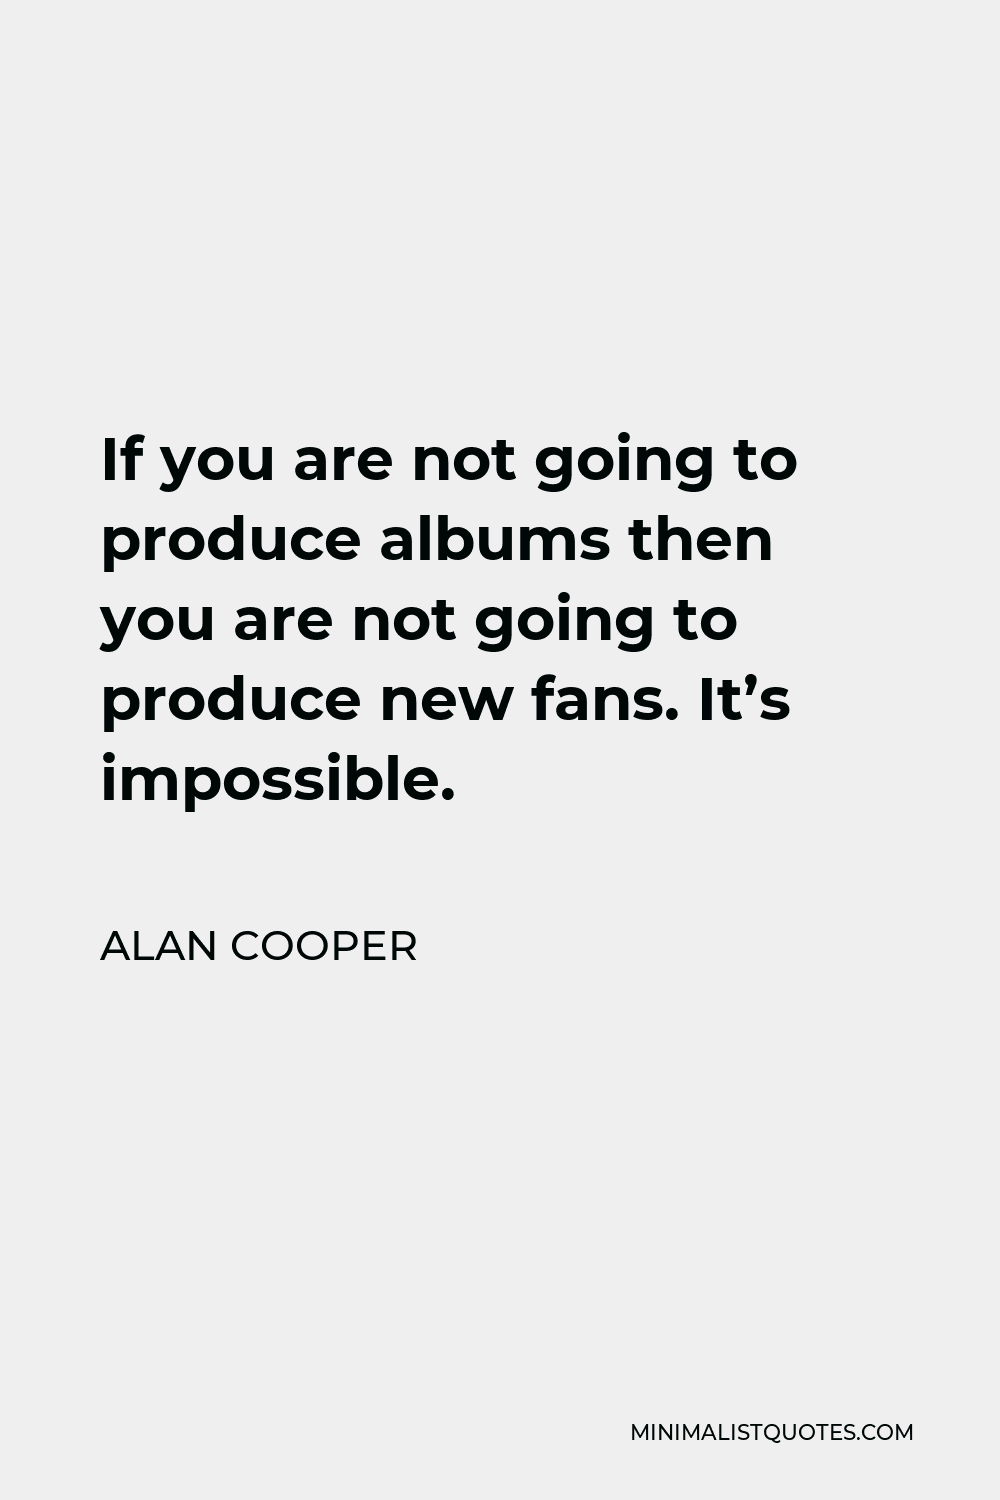 Alan Cooper Quote - If you are not going to produce albums then you are not going to produce new fans. It’s impossible.